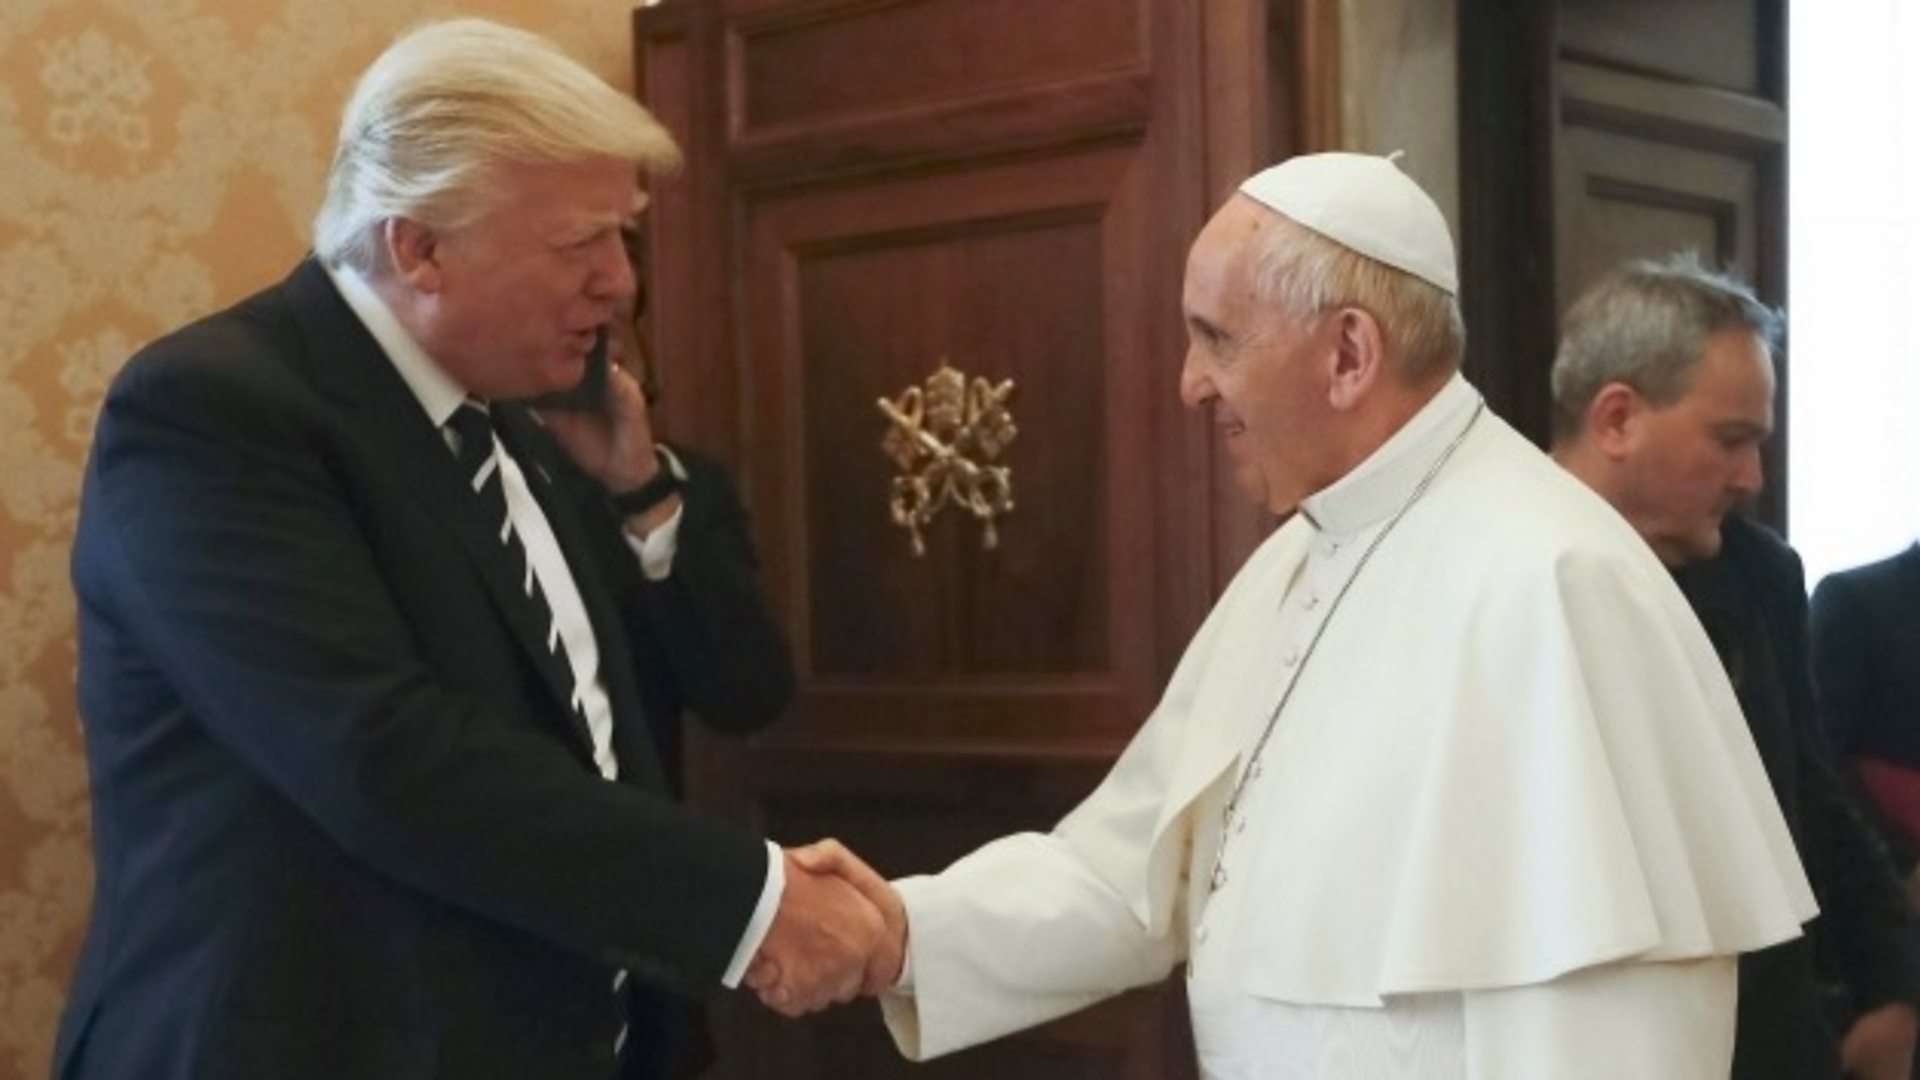 abort element væbner Donald Trump meets Pope Francis in Rome - BBC News